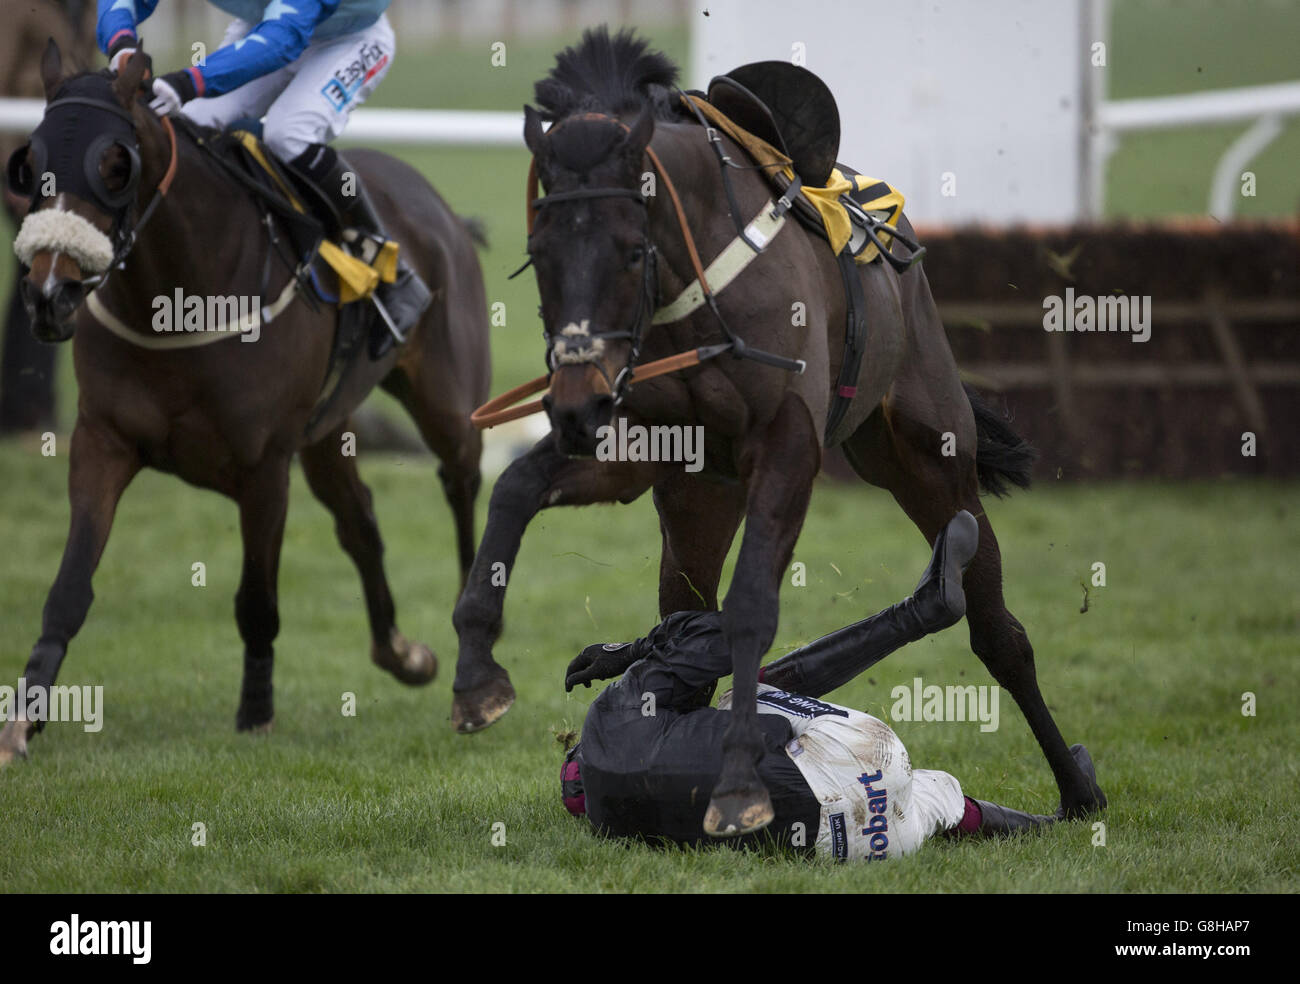 Aidan Coleman takes a kicking from Leoncavallo after becoming unseated at the last hurdle during The JCB Triumph Hurdle Trial Race run during day two of The International at Cheltenham Racecourse. Stock Photo